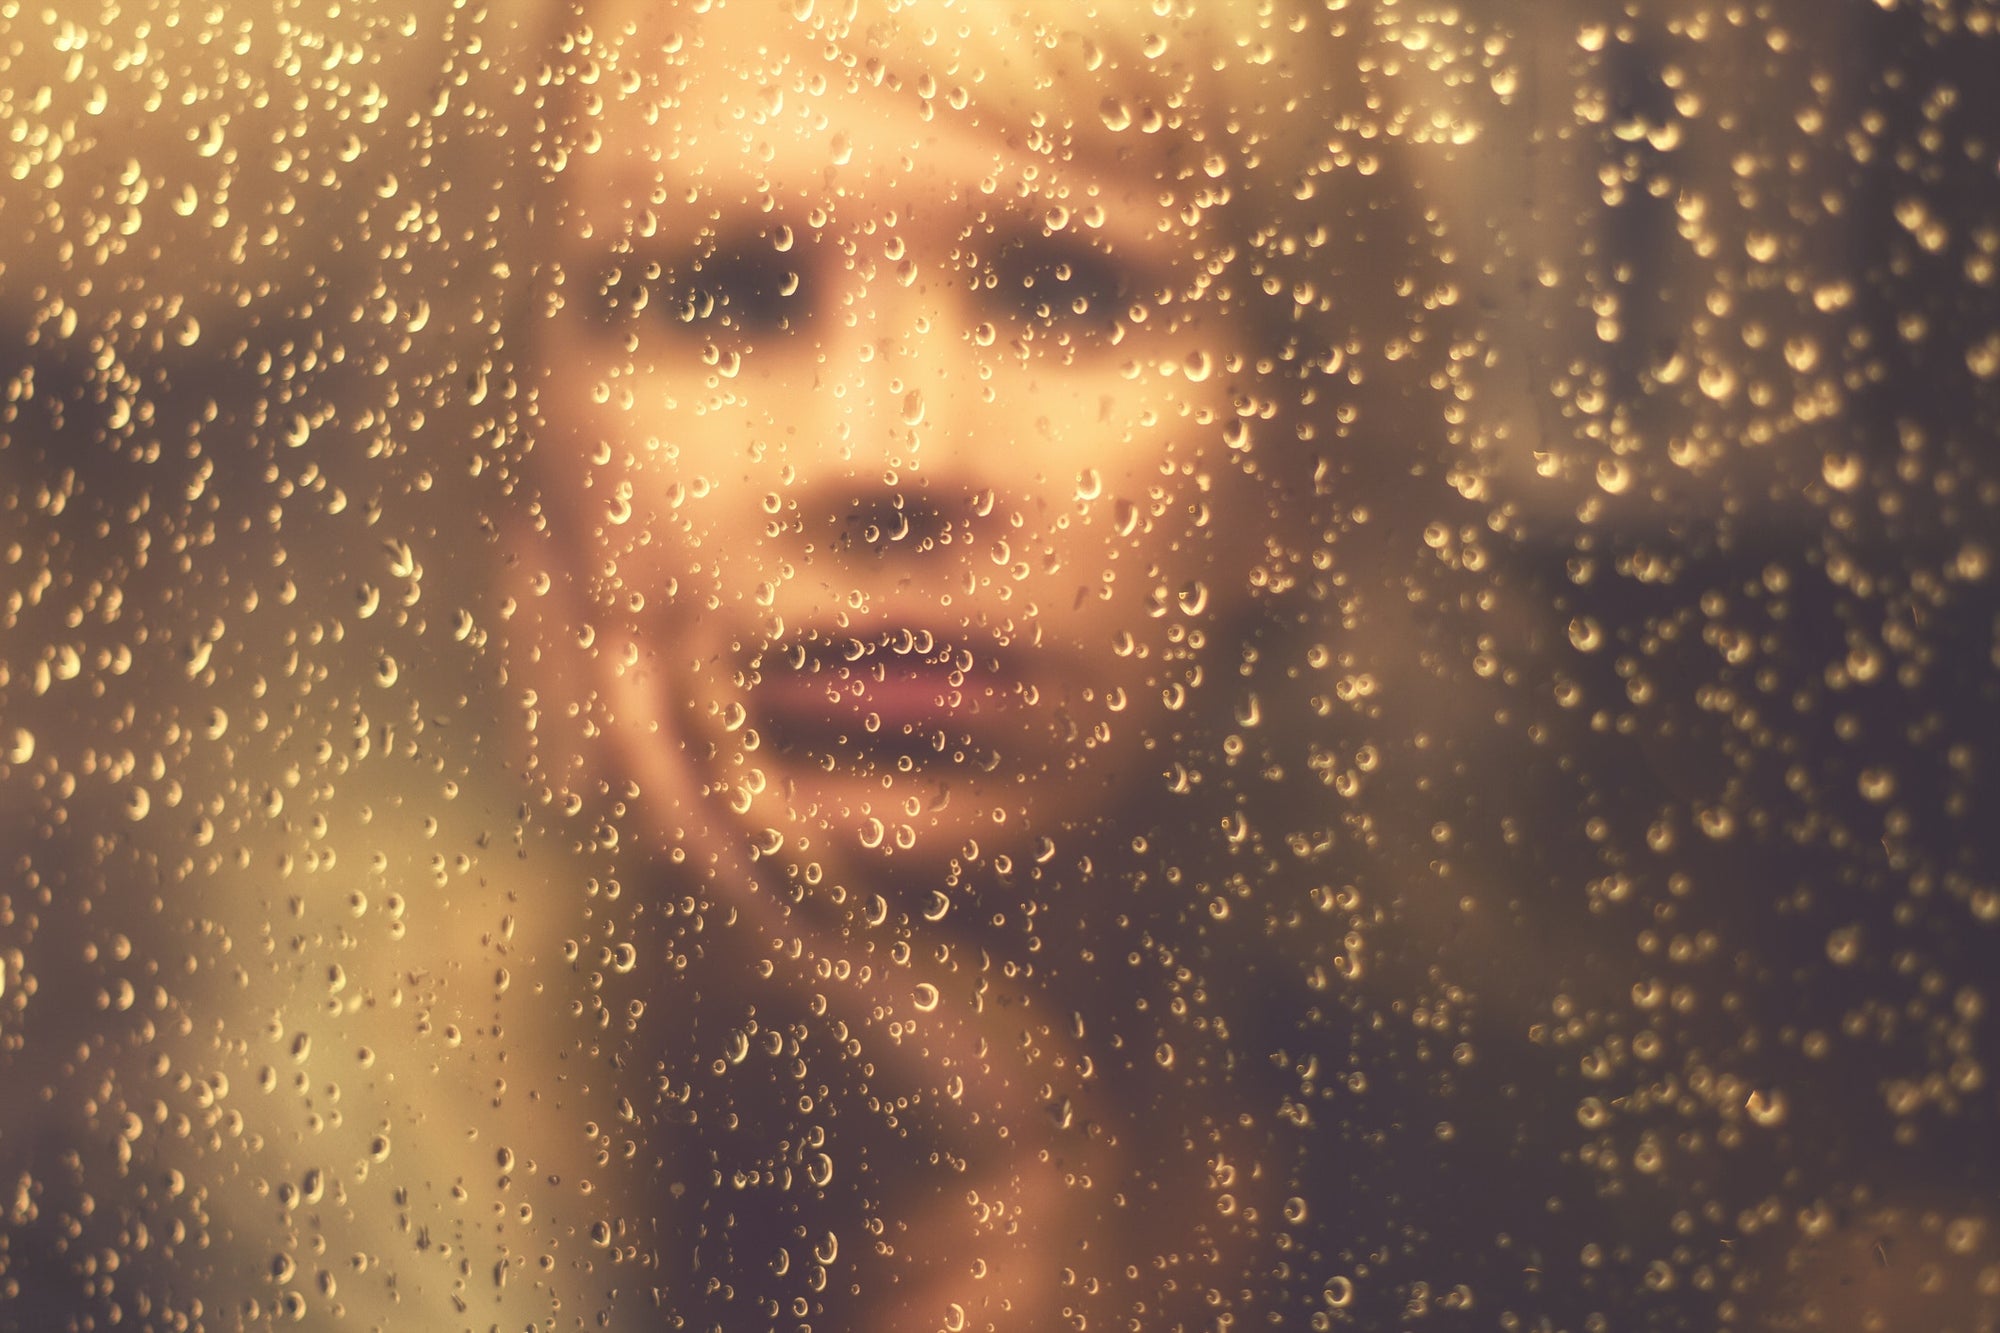 Woman Looking Through Window Covered With Raindrops